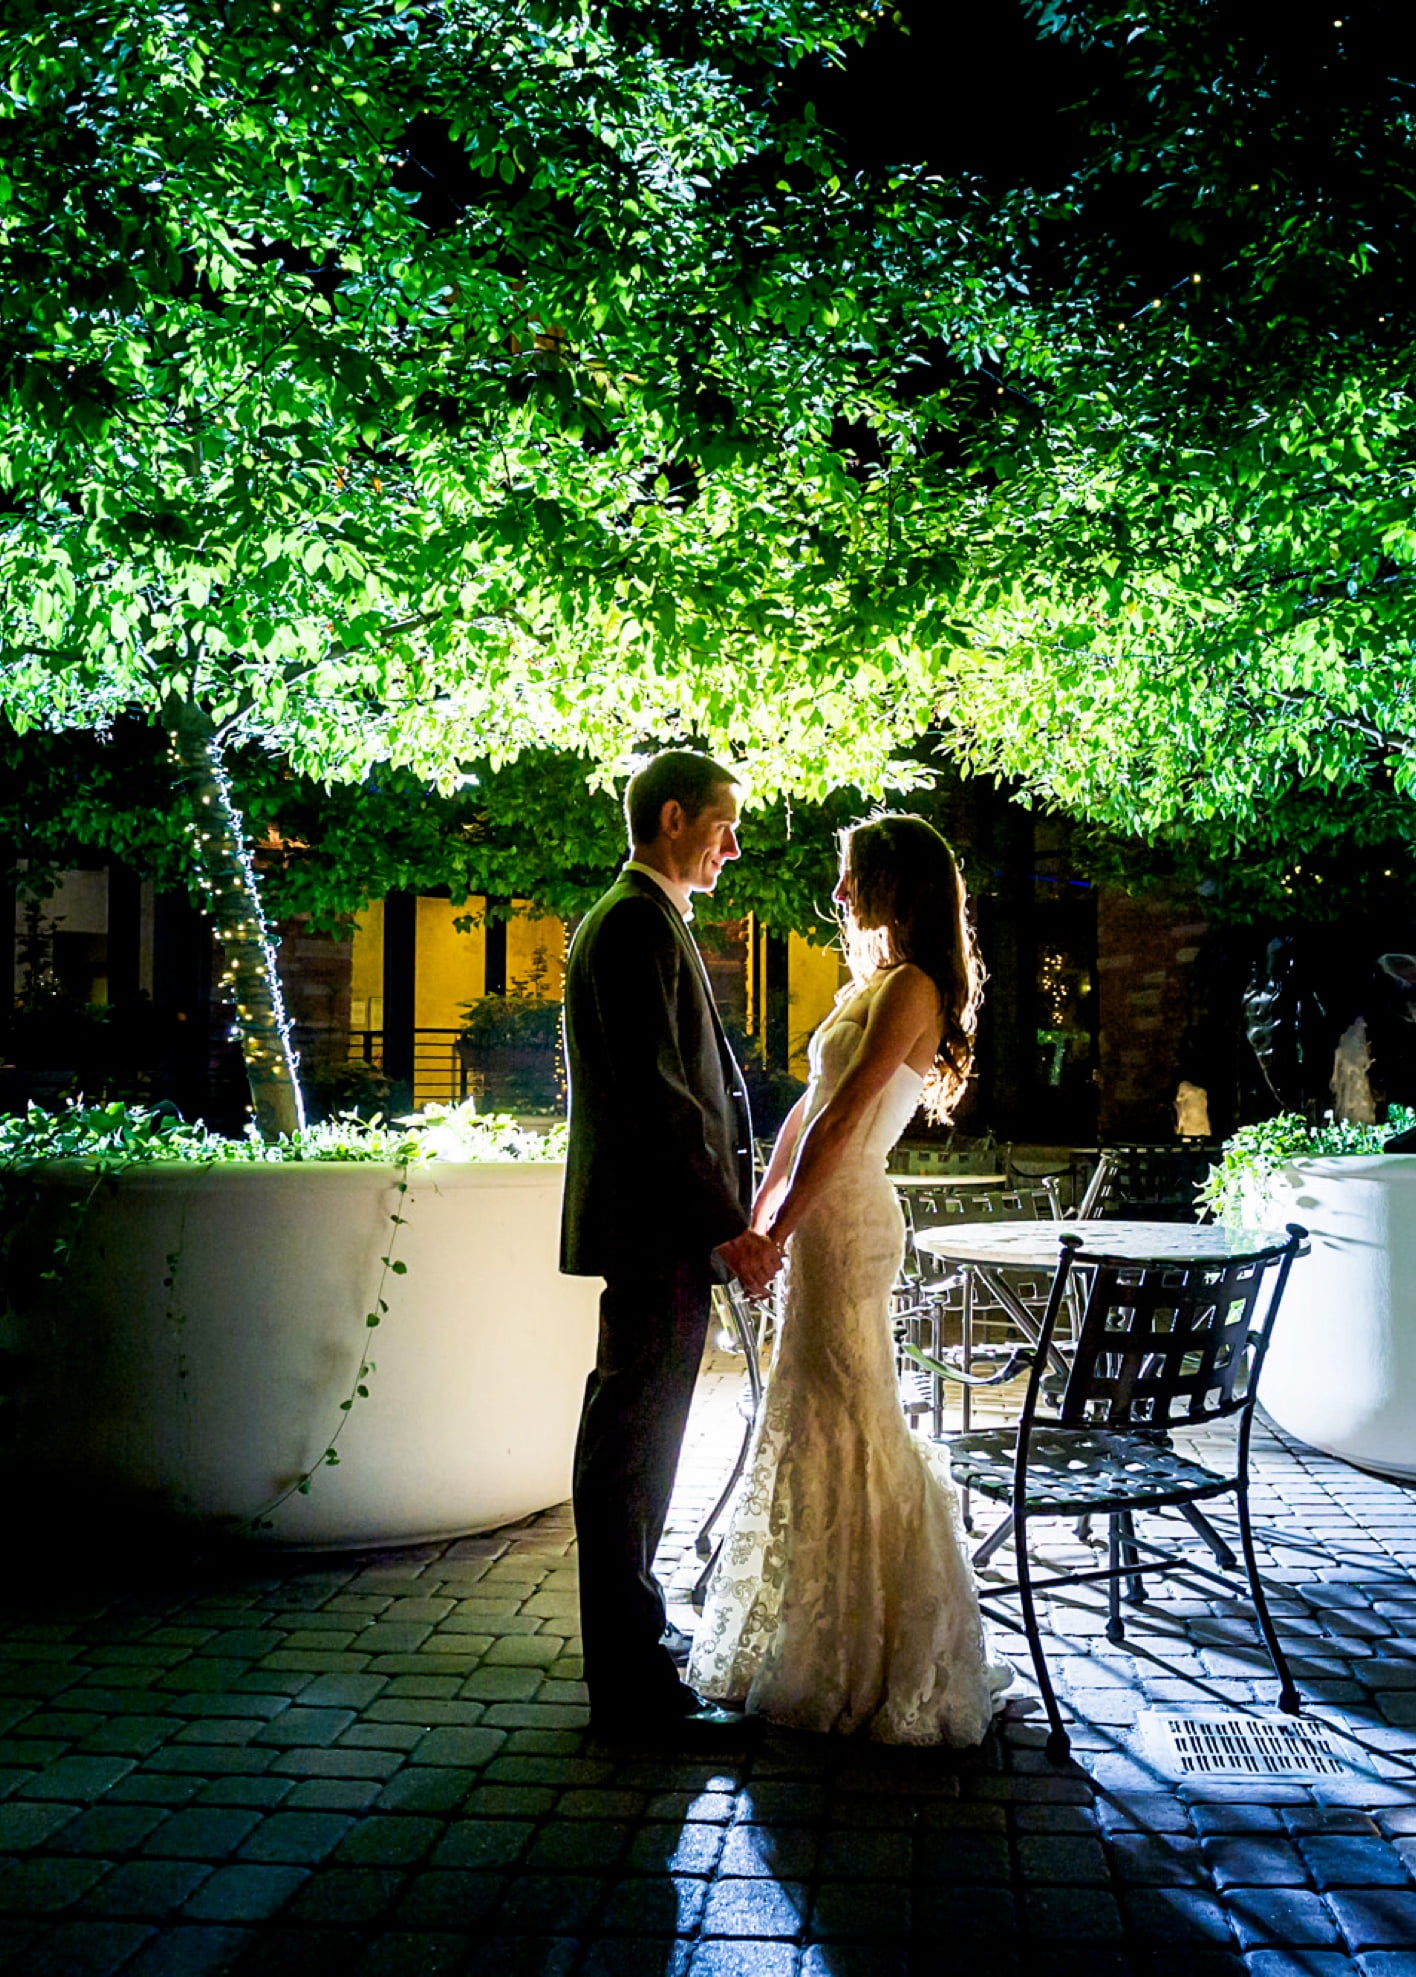 Bride and groom holding hands on an outdoor patio